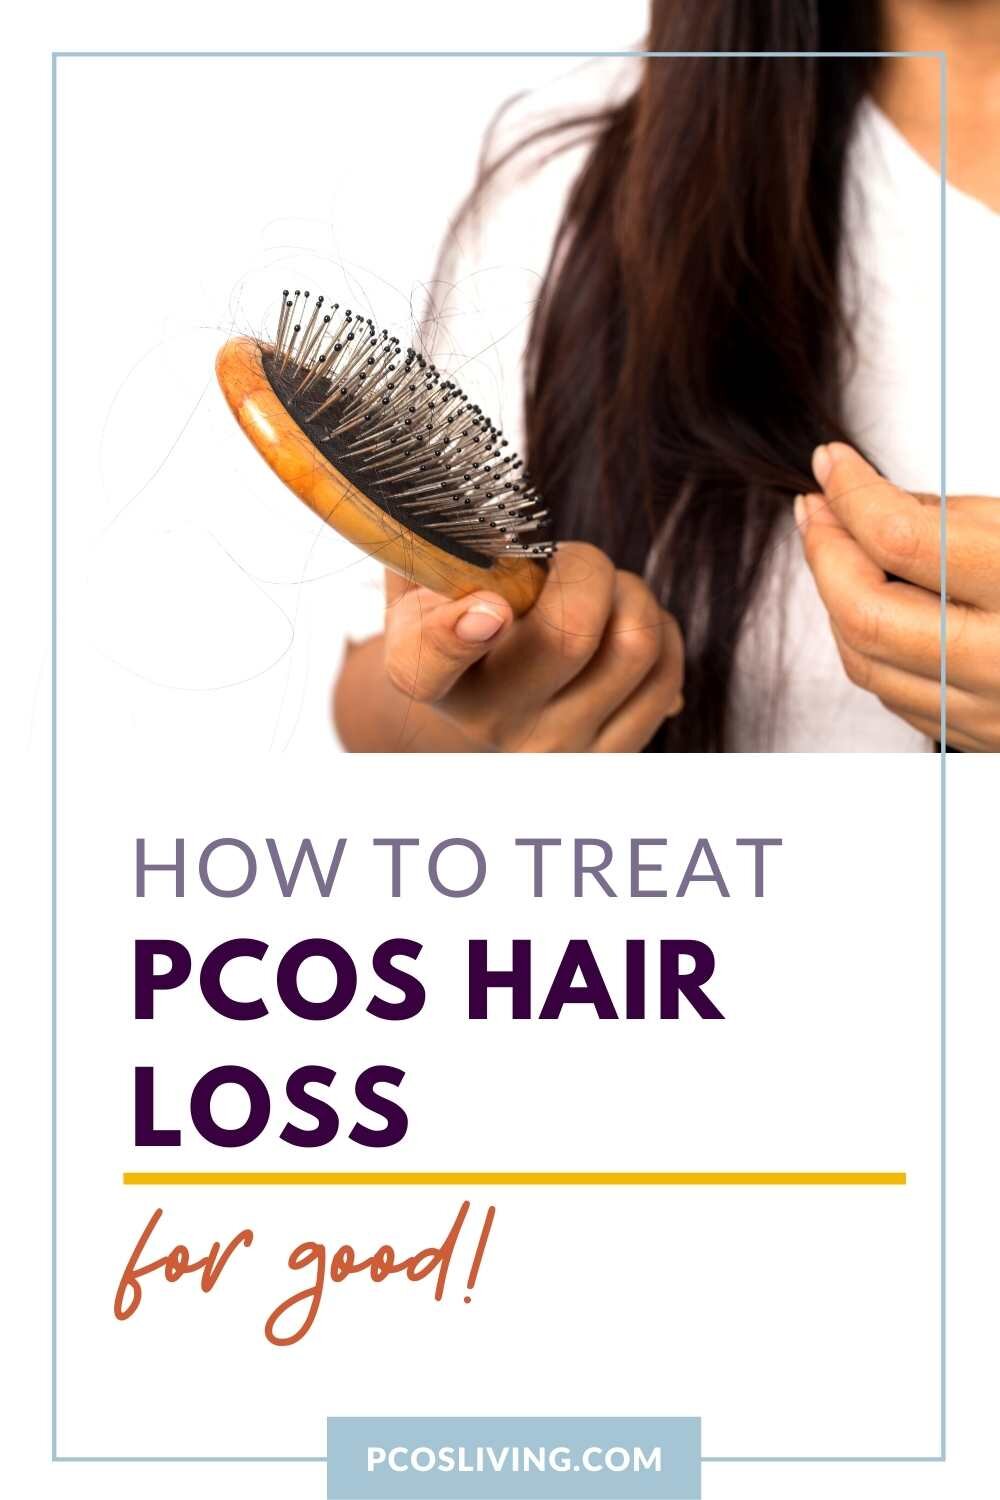 PCOS And Hair Loss: What Causes Hair Fall/Thinning in Women When Diagnosed  With PCOS?